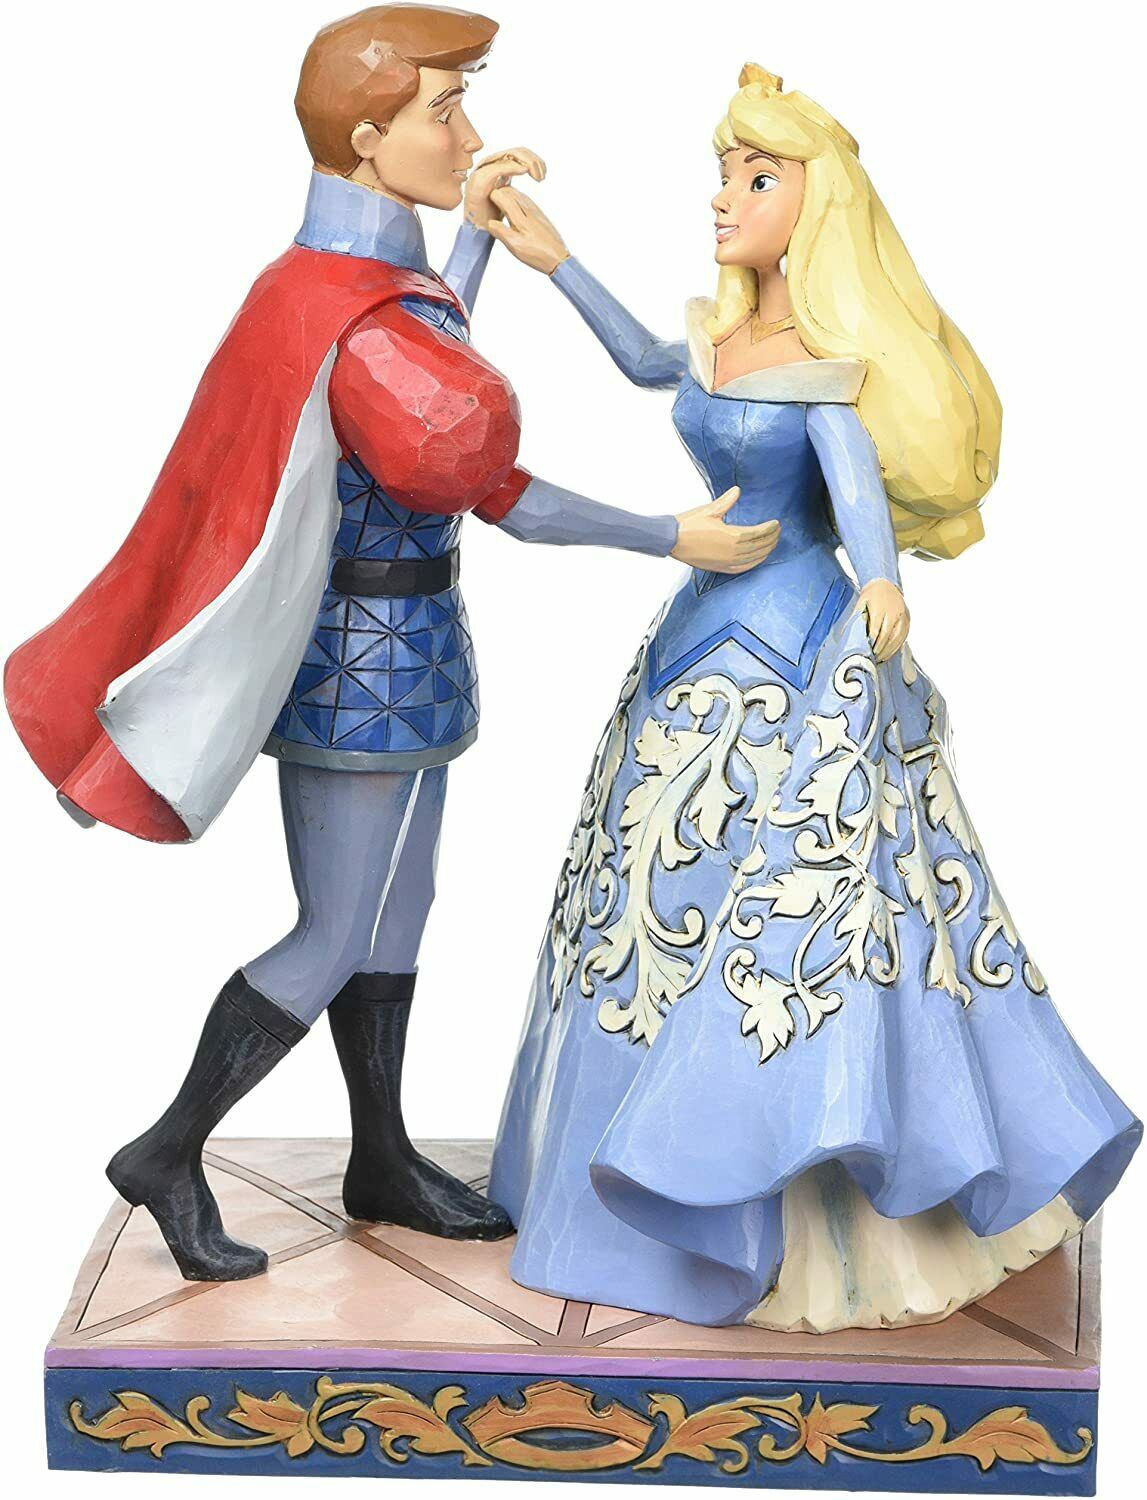  Jim Shore Disney Traditions by Enesco Snow White and Prince  Wedding Figurine : Home & Kitchen